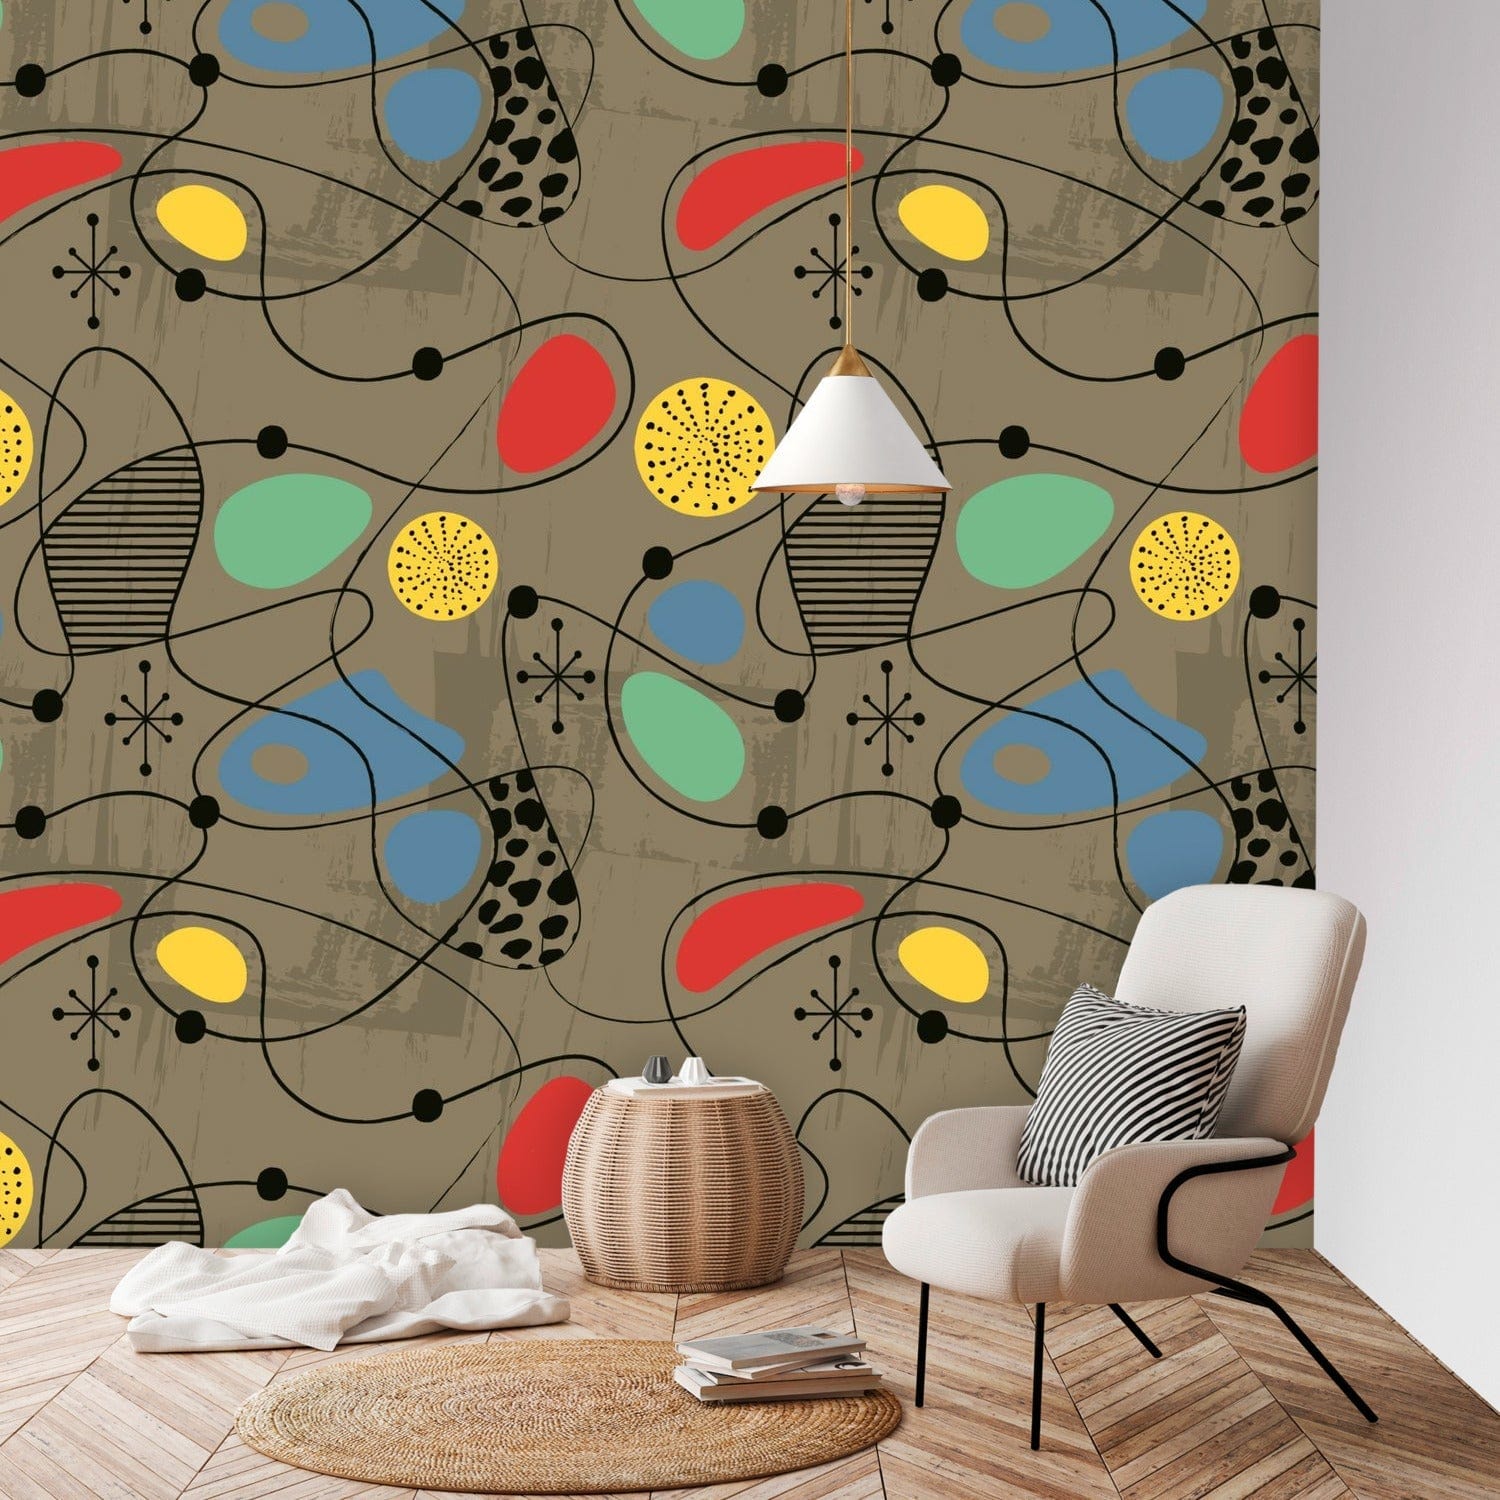 Mid Century Modern Wallpaper Sand Brown, Abstract Retro Atomic Starburst Peel And Stick Wall Murals Wallpaper H96 x W100